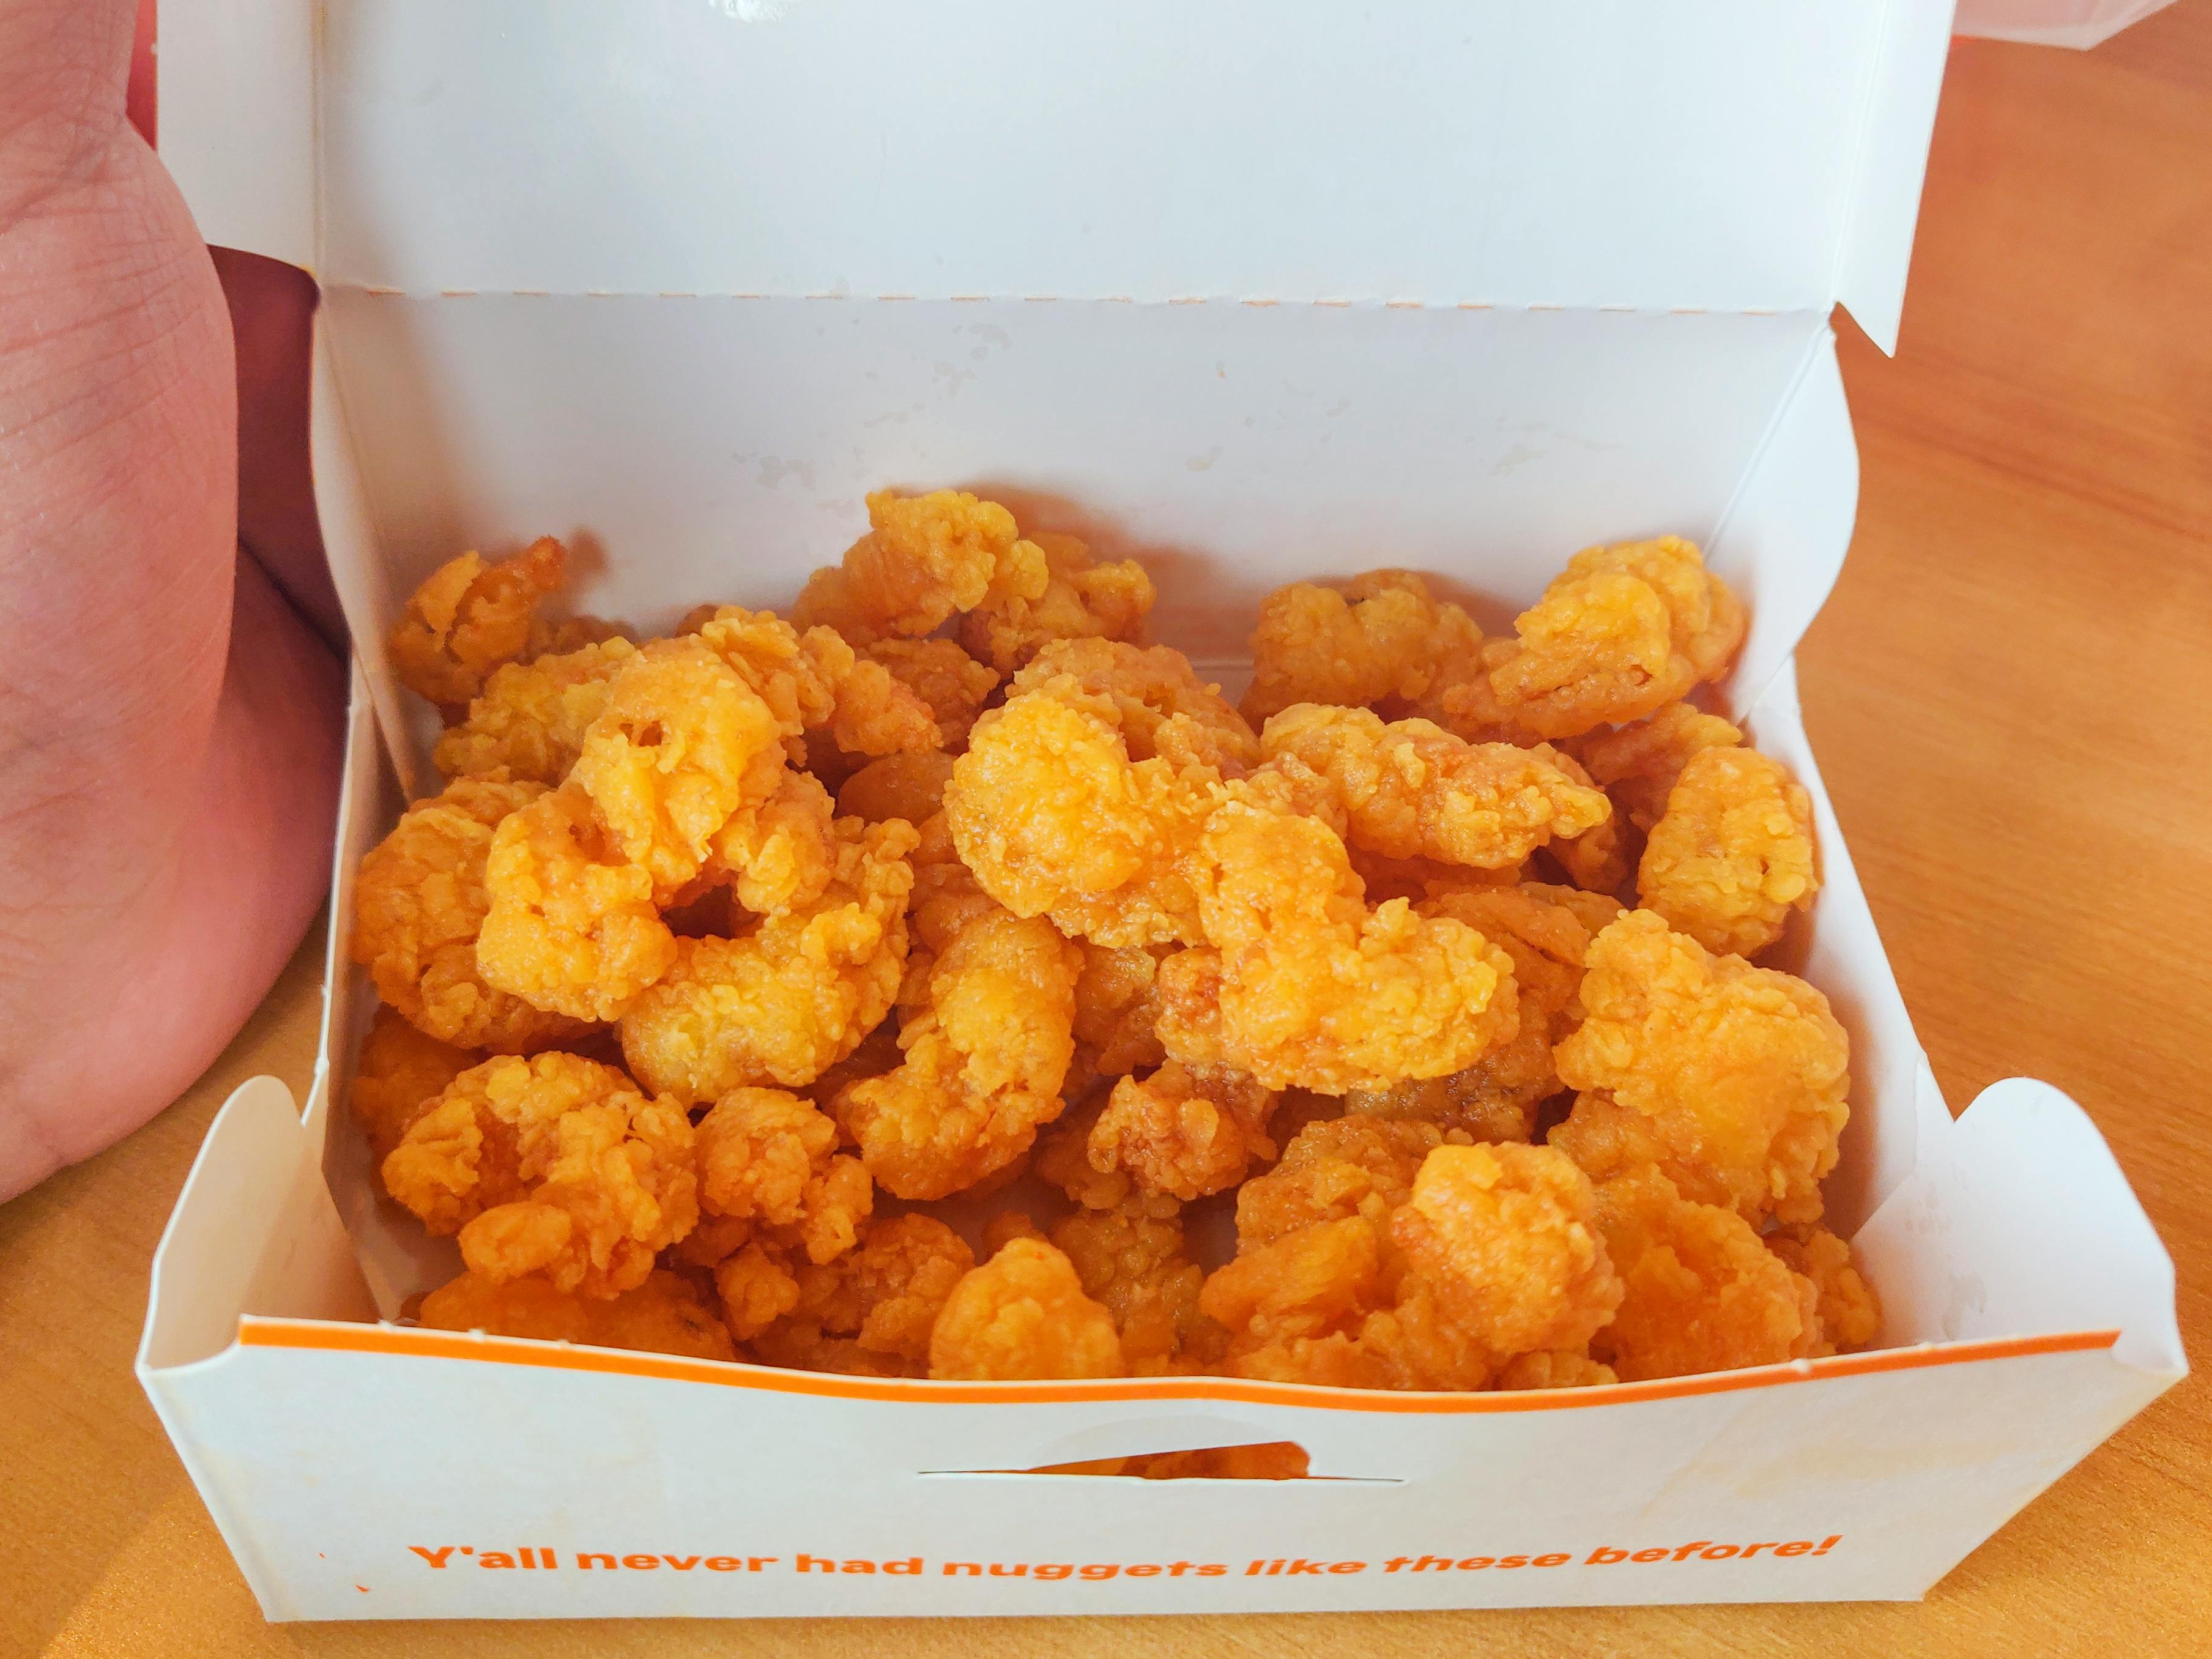 A box of Popeyes popcorn shrimp sitting on a table with a person's hand lifting the lid of the box.